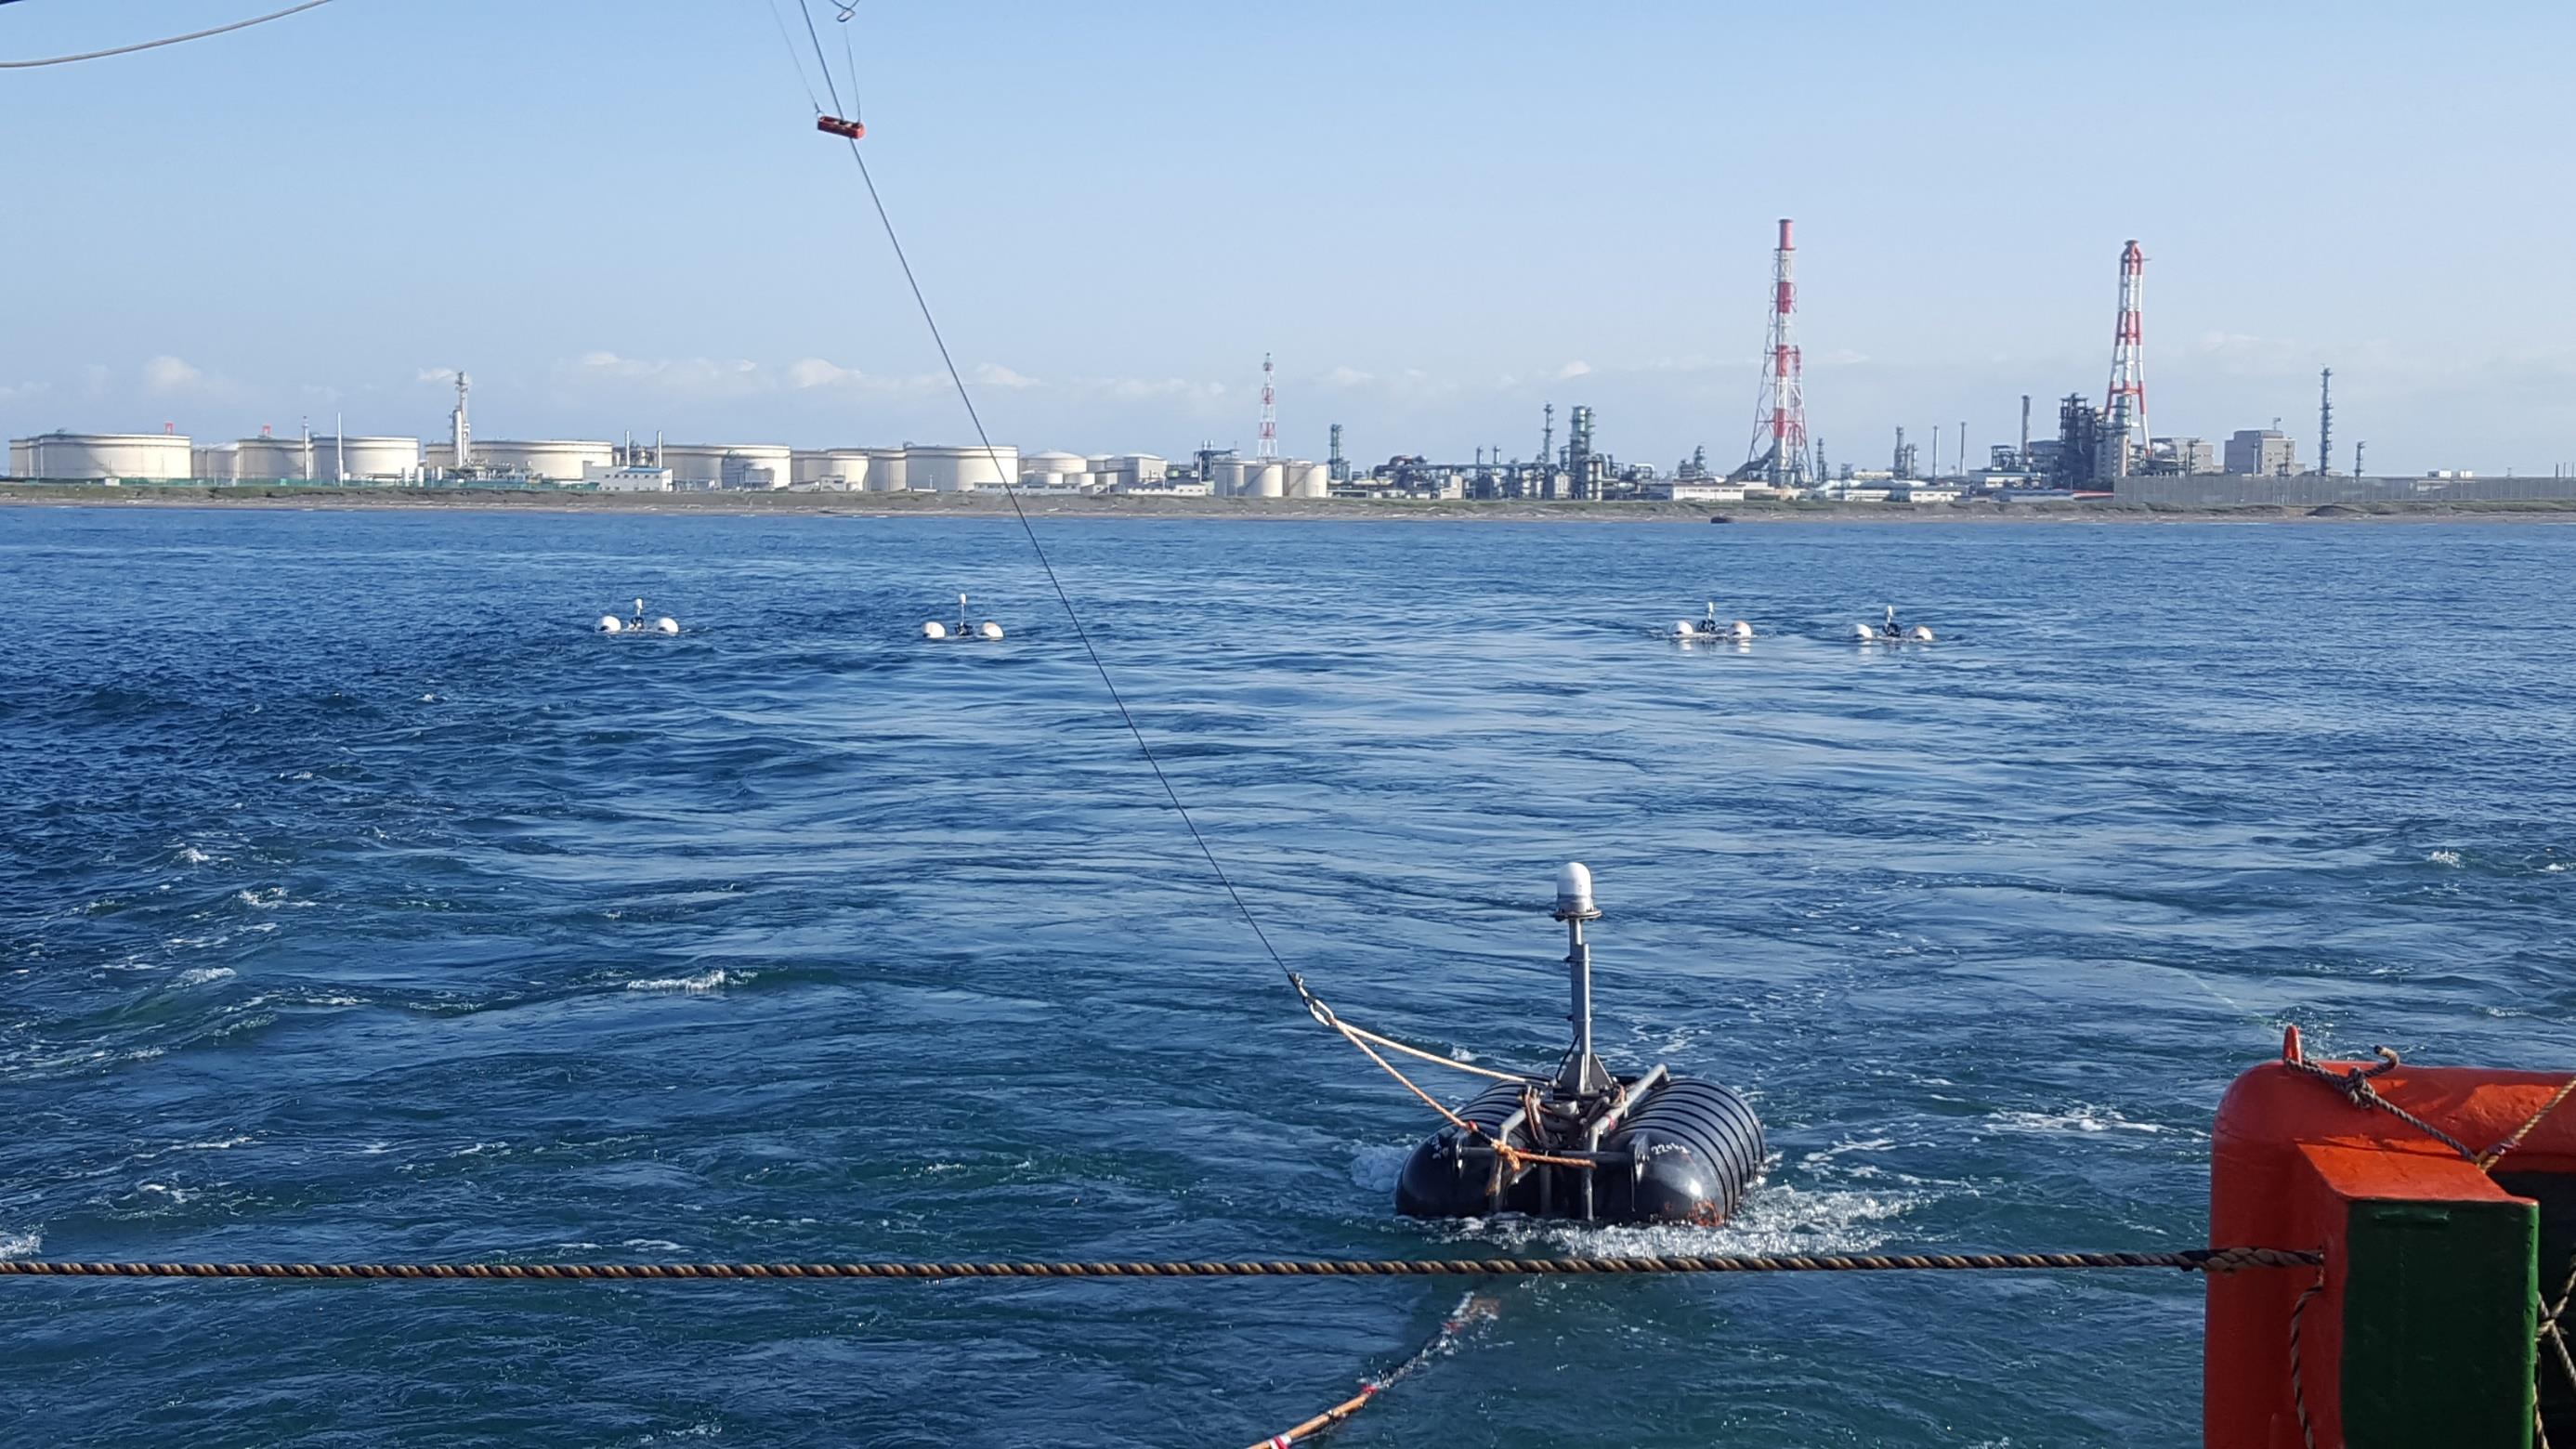 IMAGE OF SEISMIC SOURCE FLOATING ON THE WATER WITH THE TOMAKOMAI PORT IN THE DISTANCE